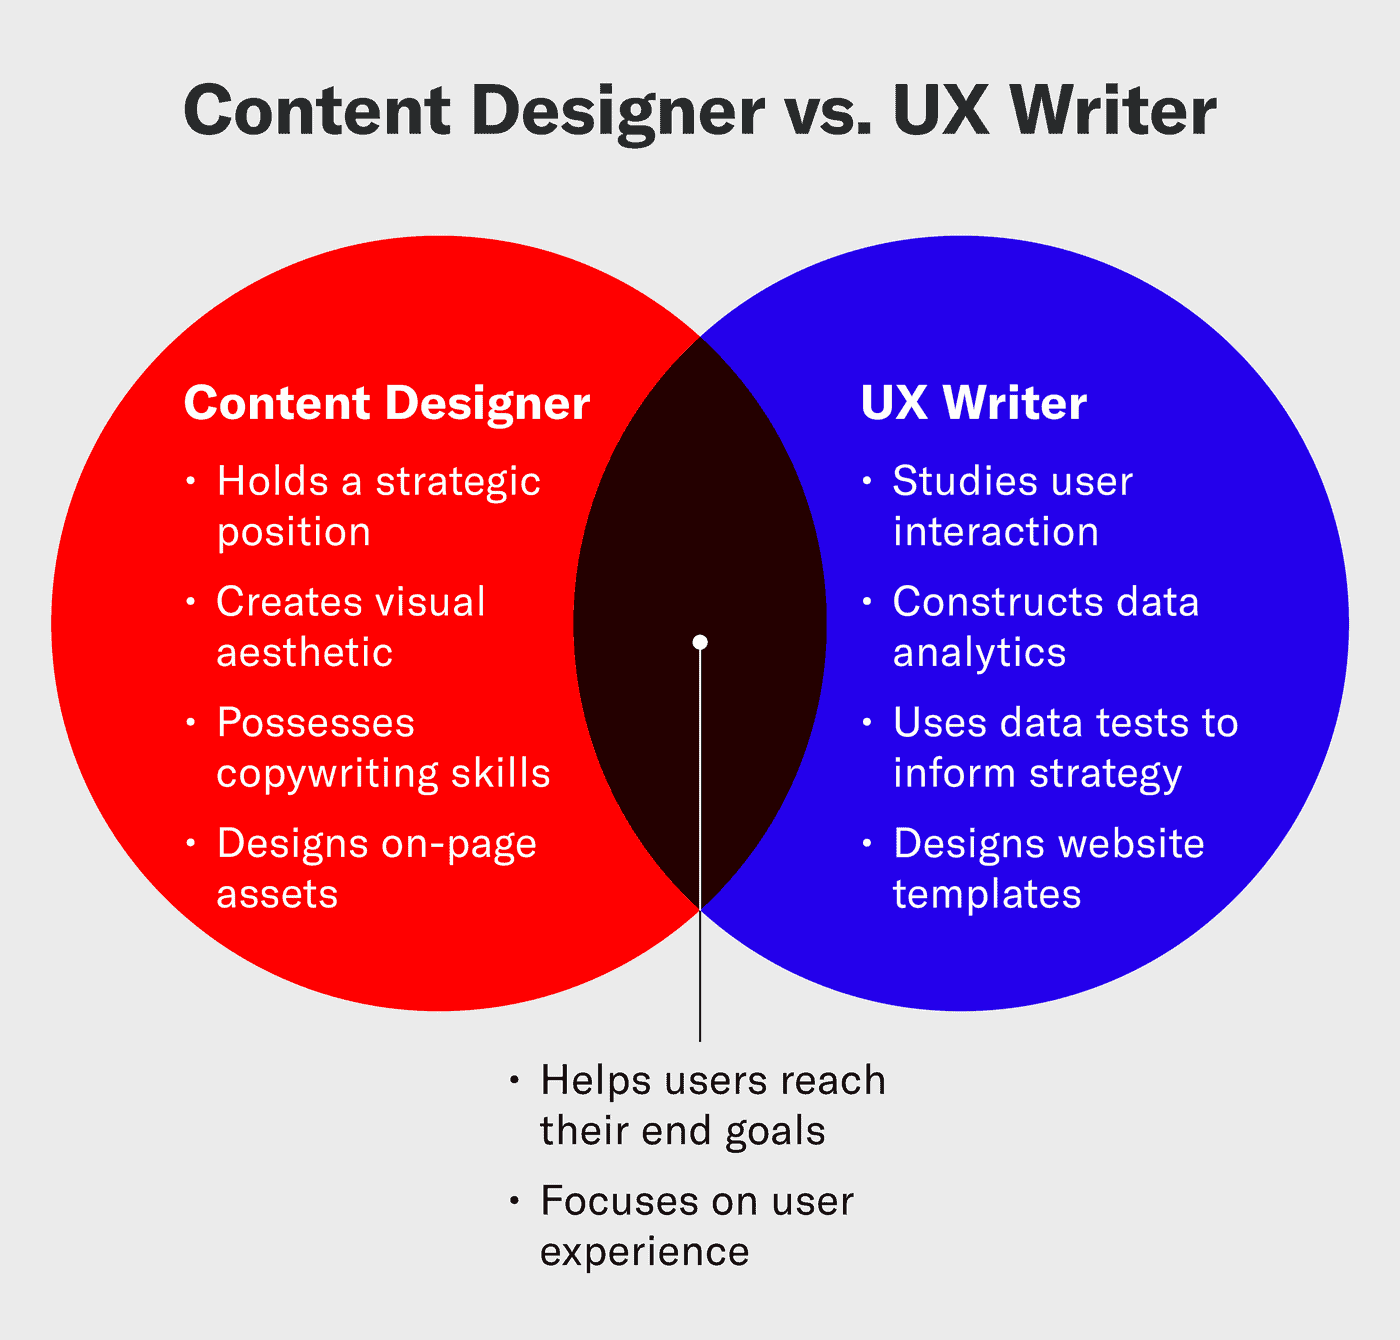 Venn diagram showing the differences between content designers and UX writers.